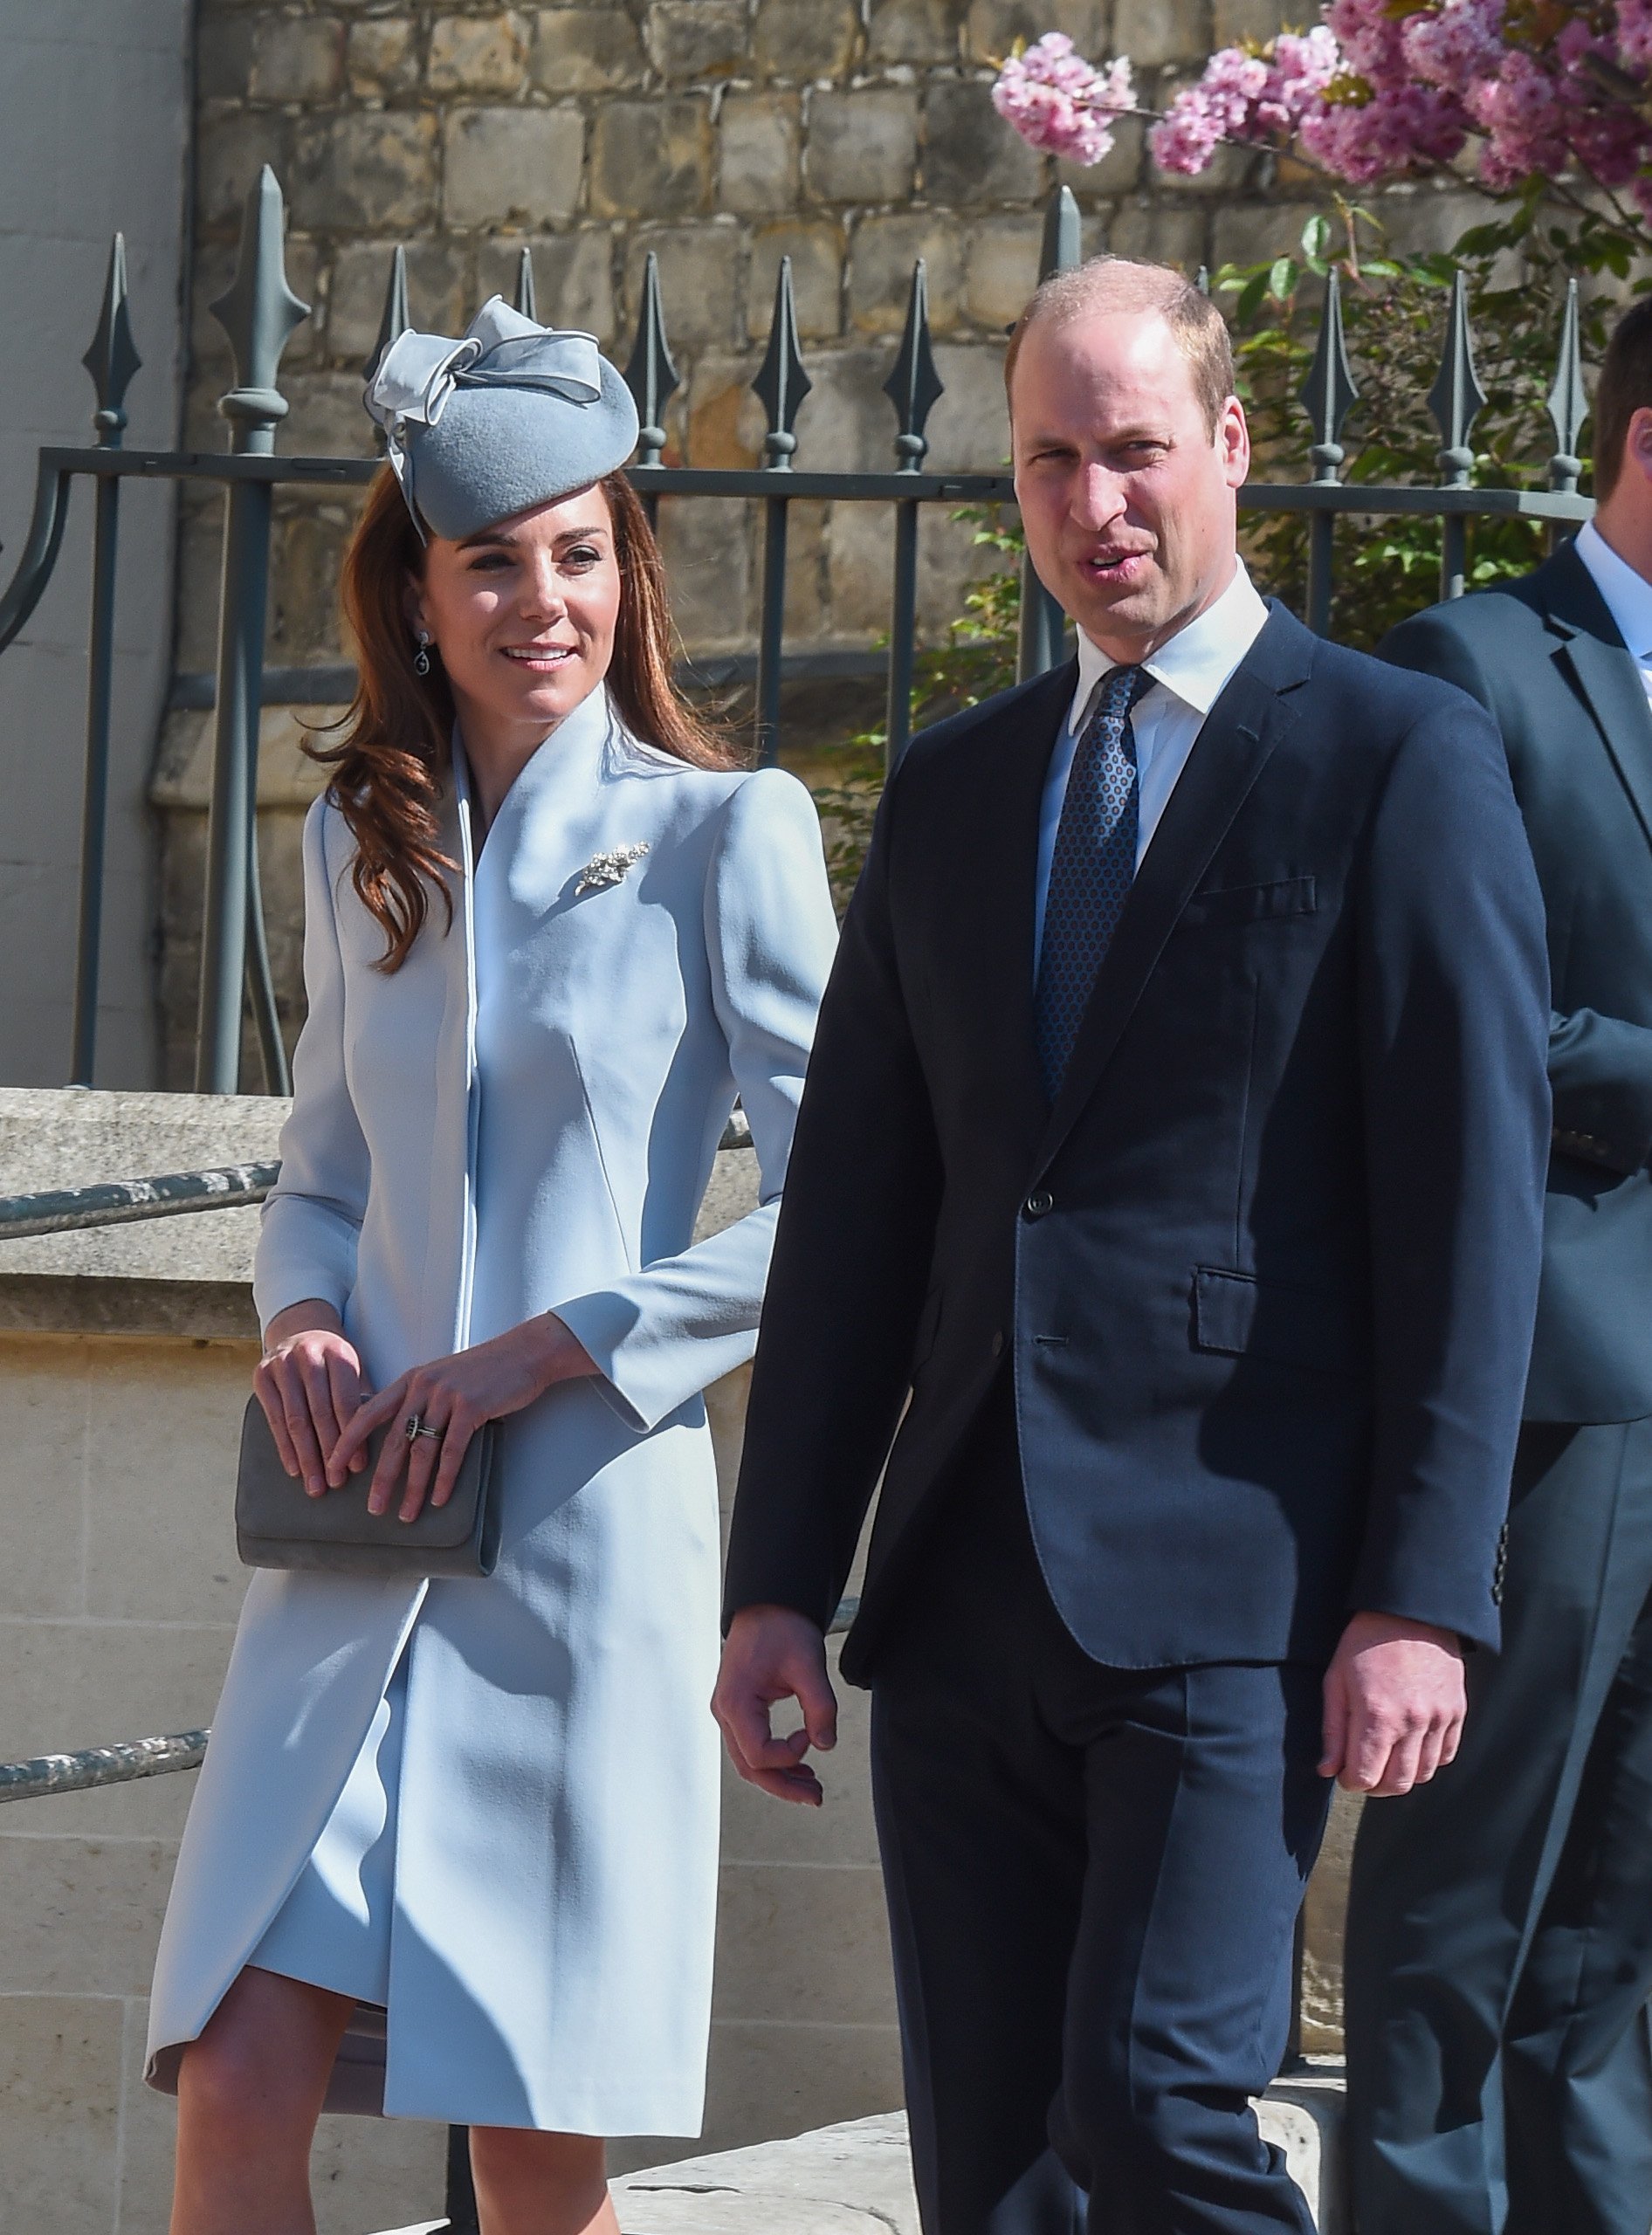 The Duke and Duchess of Cambridge attend the Easter Sunday service at St George's Chapel on April 21, 2019. | Photo: GettyImages